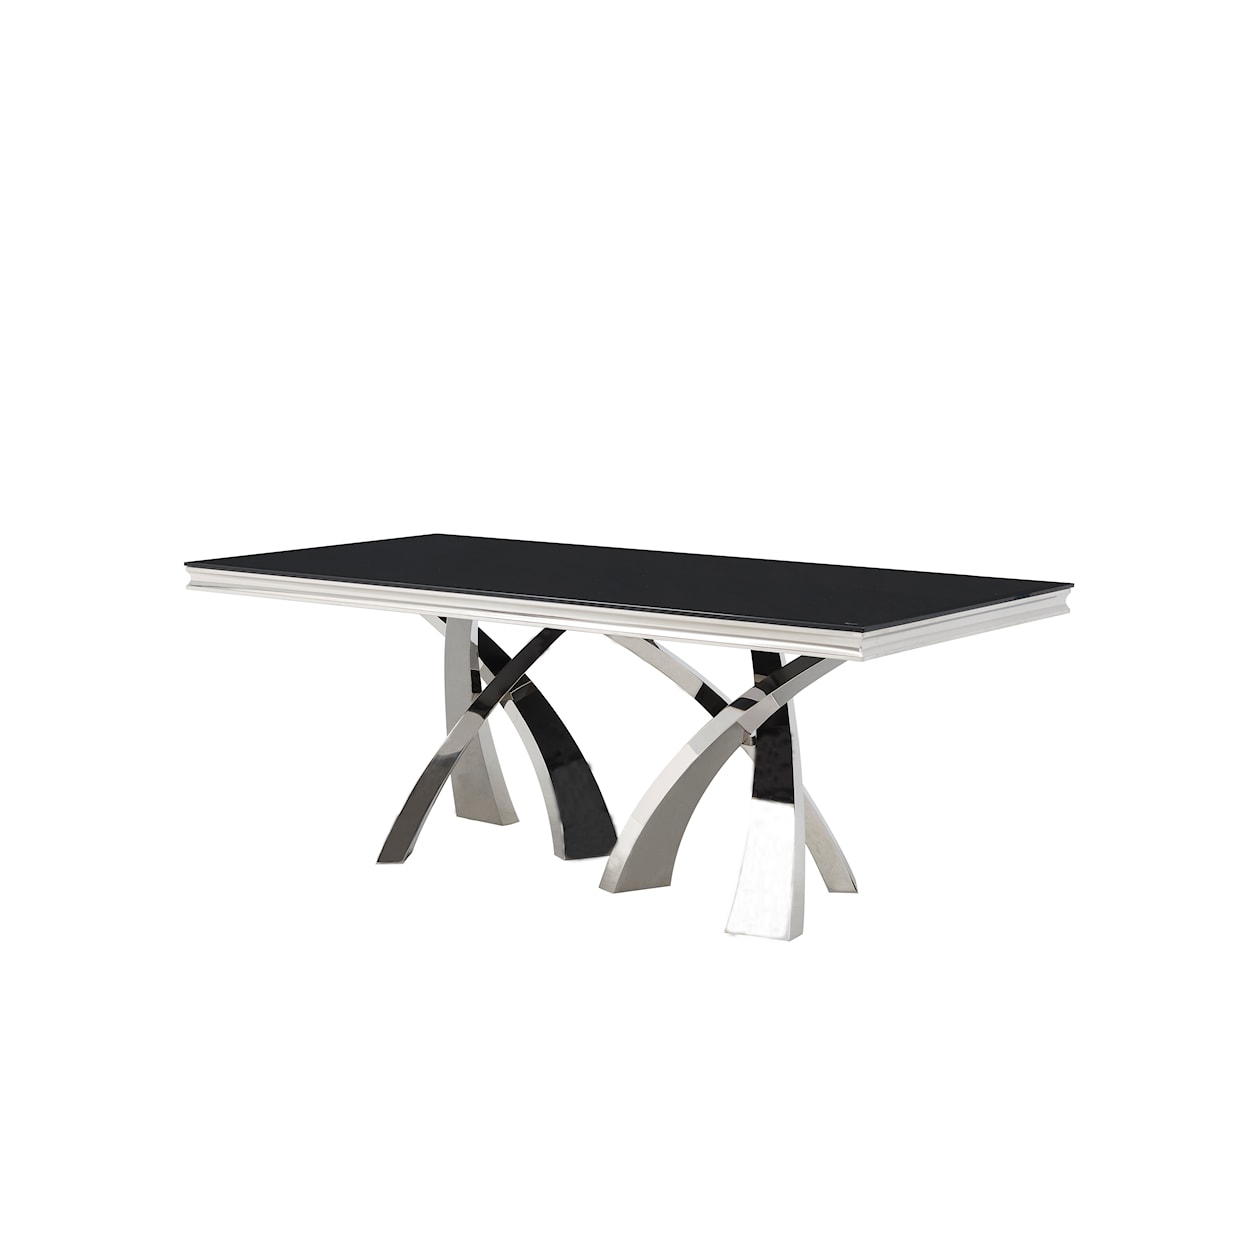 New Classic Ulysses Rectangular Dining Table